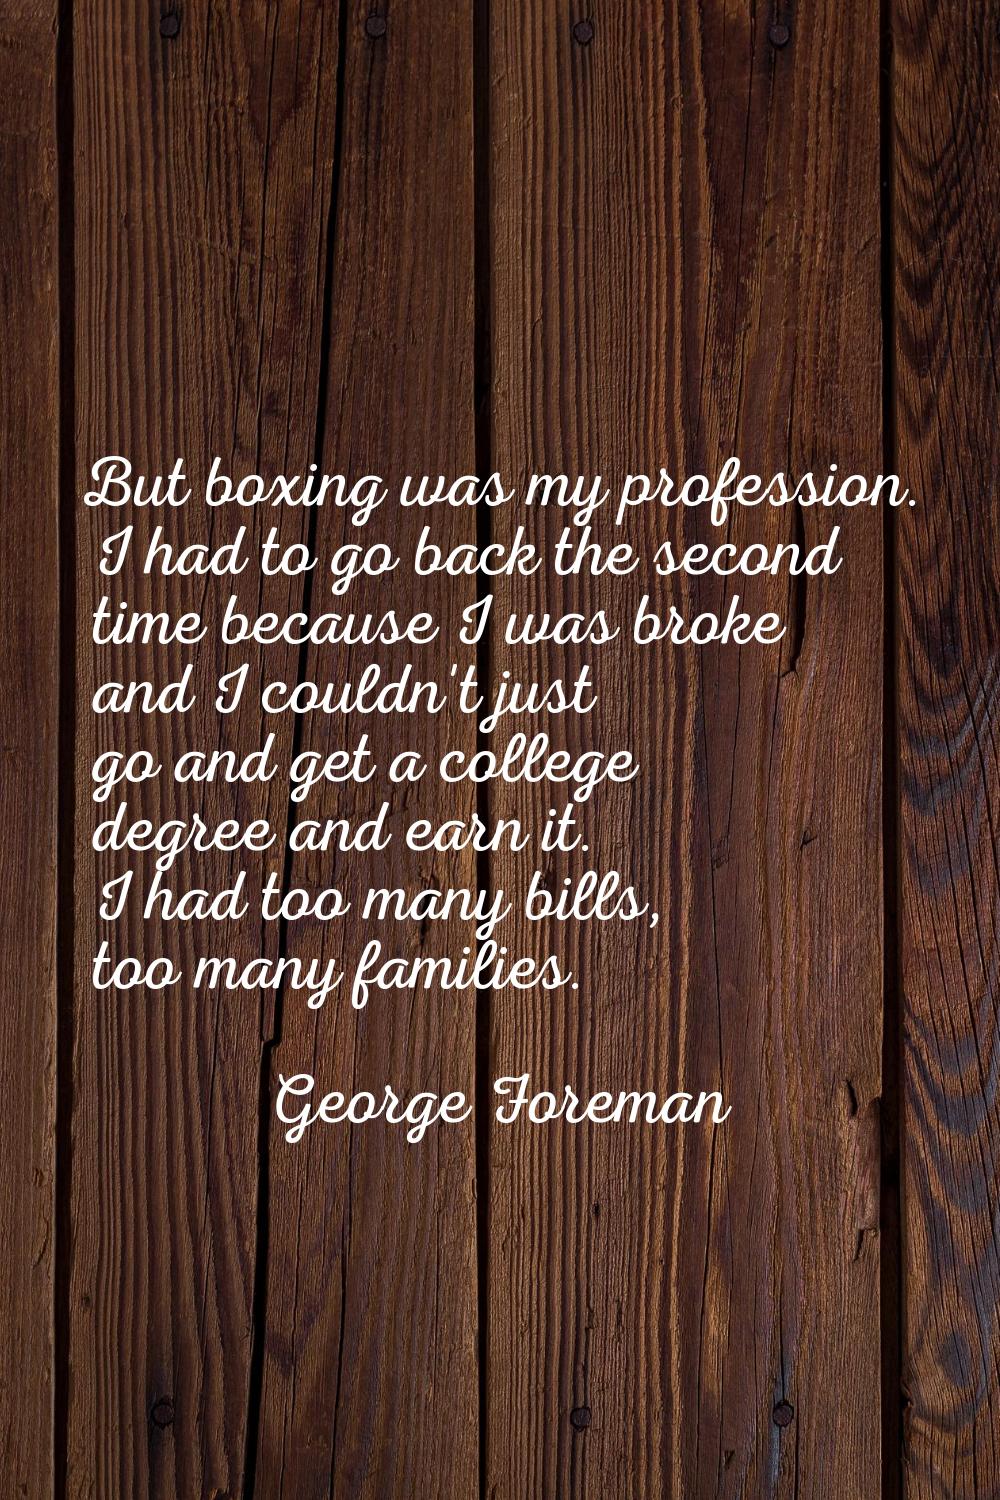 But boxing was my profession. I had to go back the second time because I was broke and I couldn't j